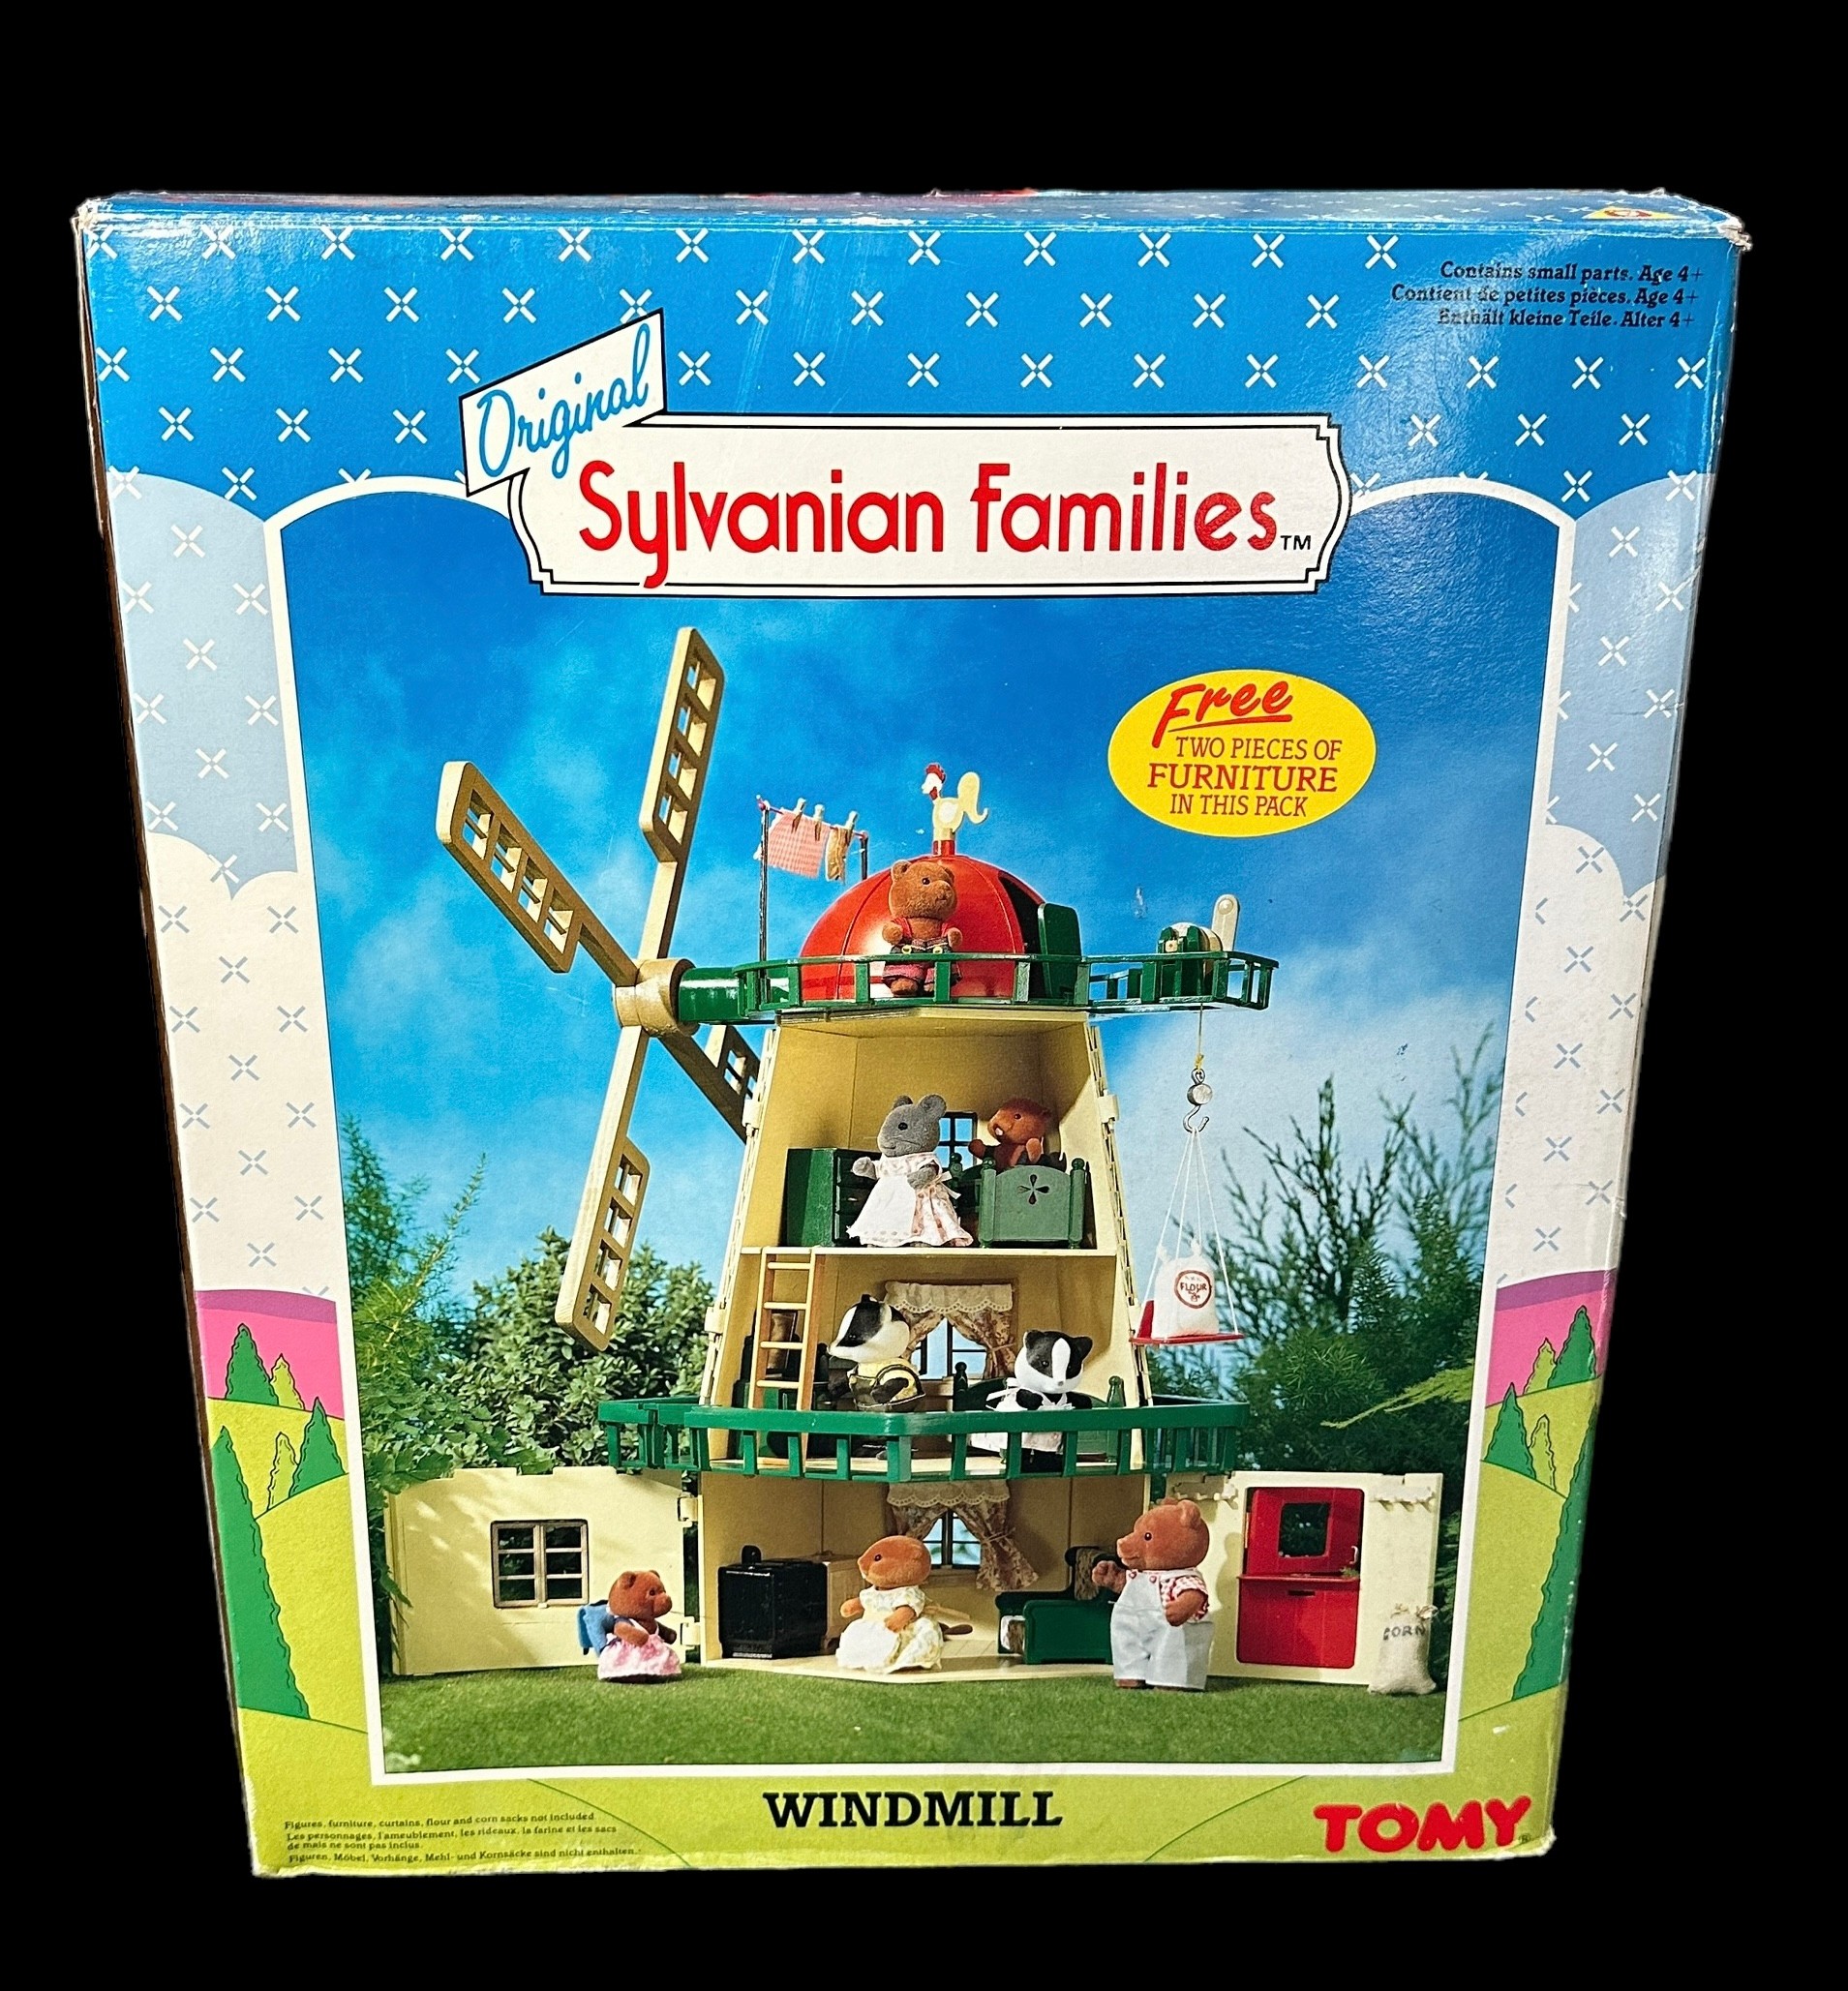 TOMY Sylvanian Families Windmill No. 3177, generally excellent in good plus box. Contents